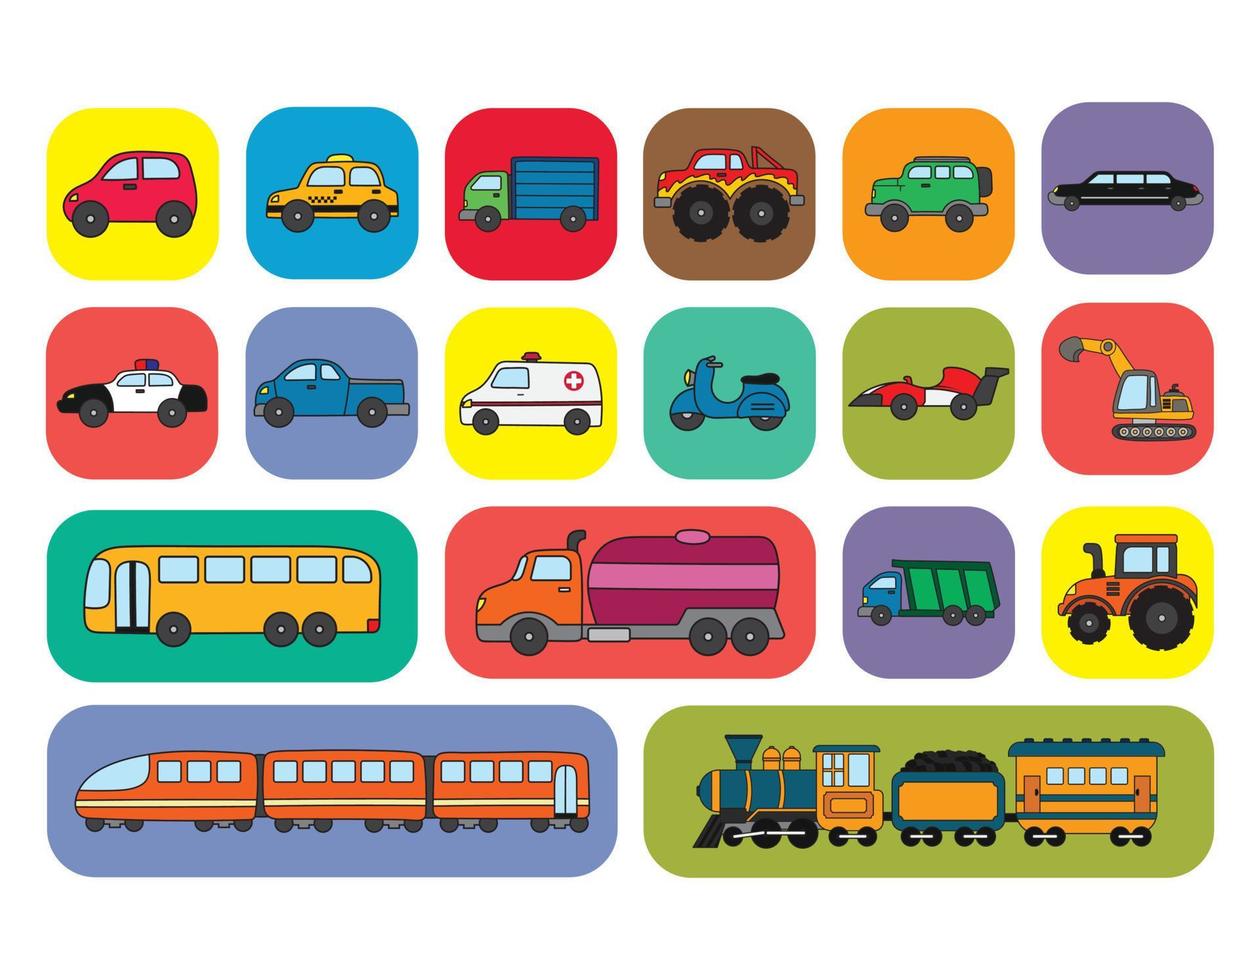 Vector illustration set of transportation vehicle car and trains icons with colorful background